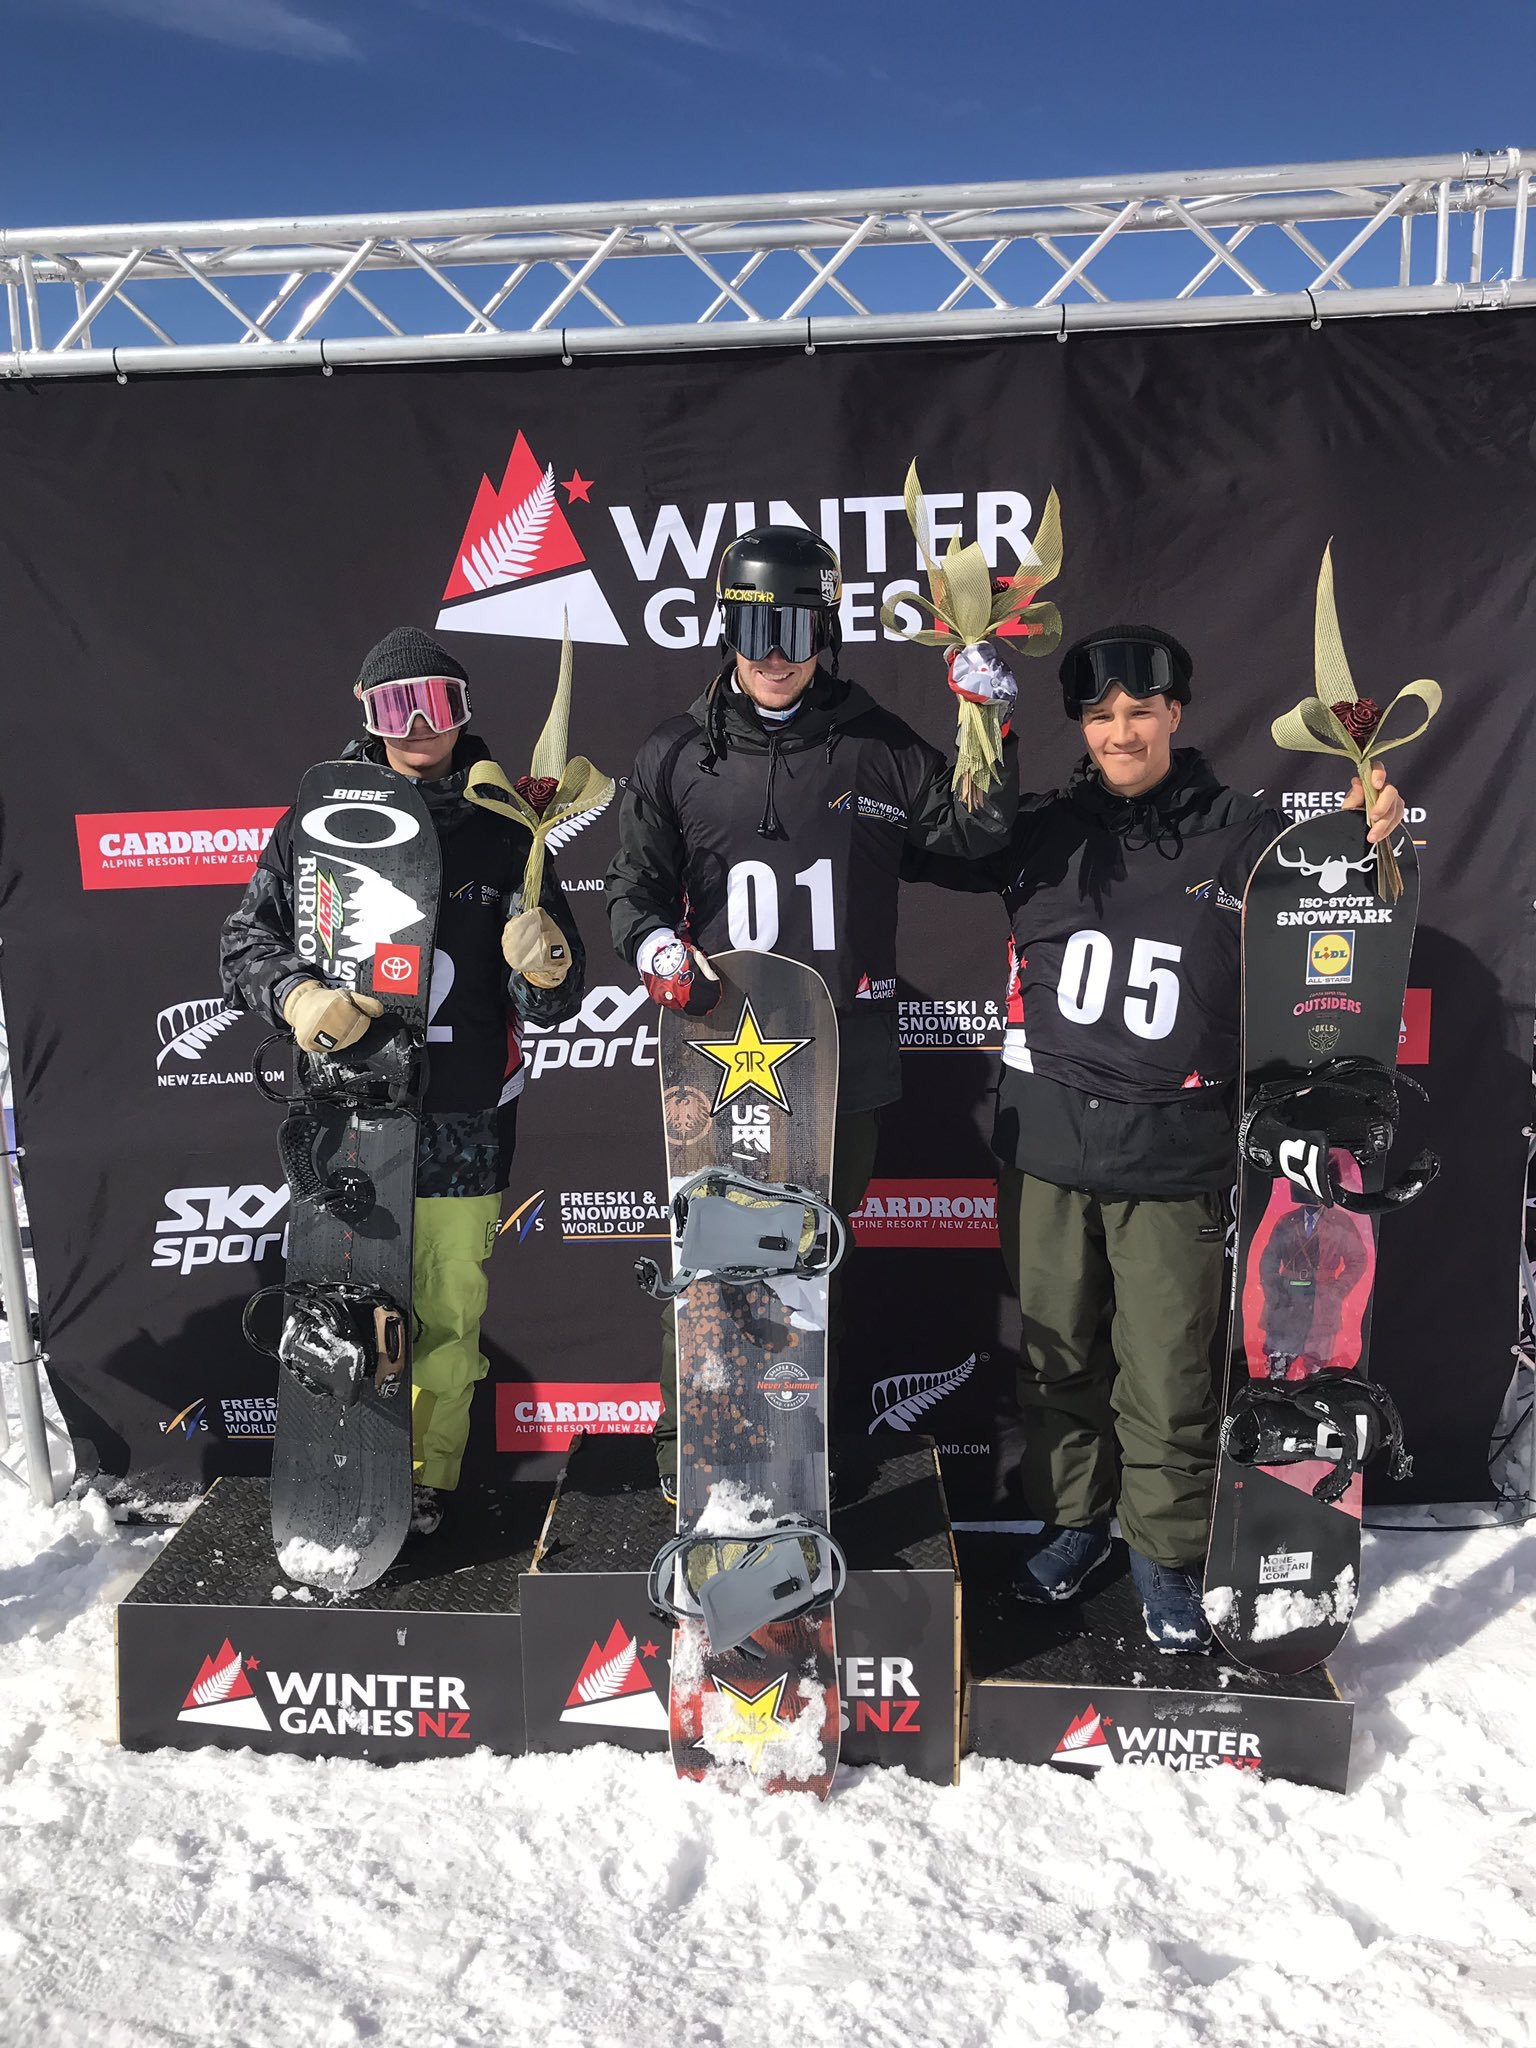 Corning claims FIS Snowboard Big Air World Cup glory as weather wreaks havoc